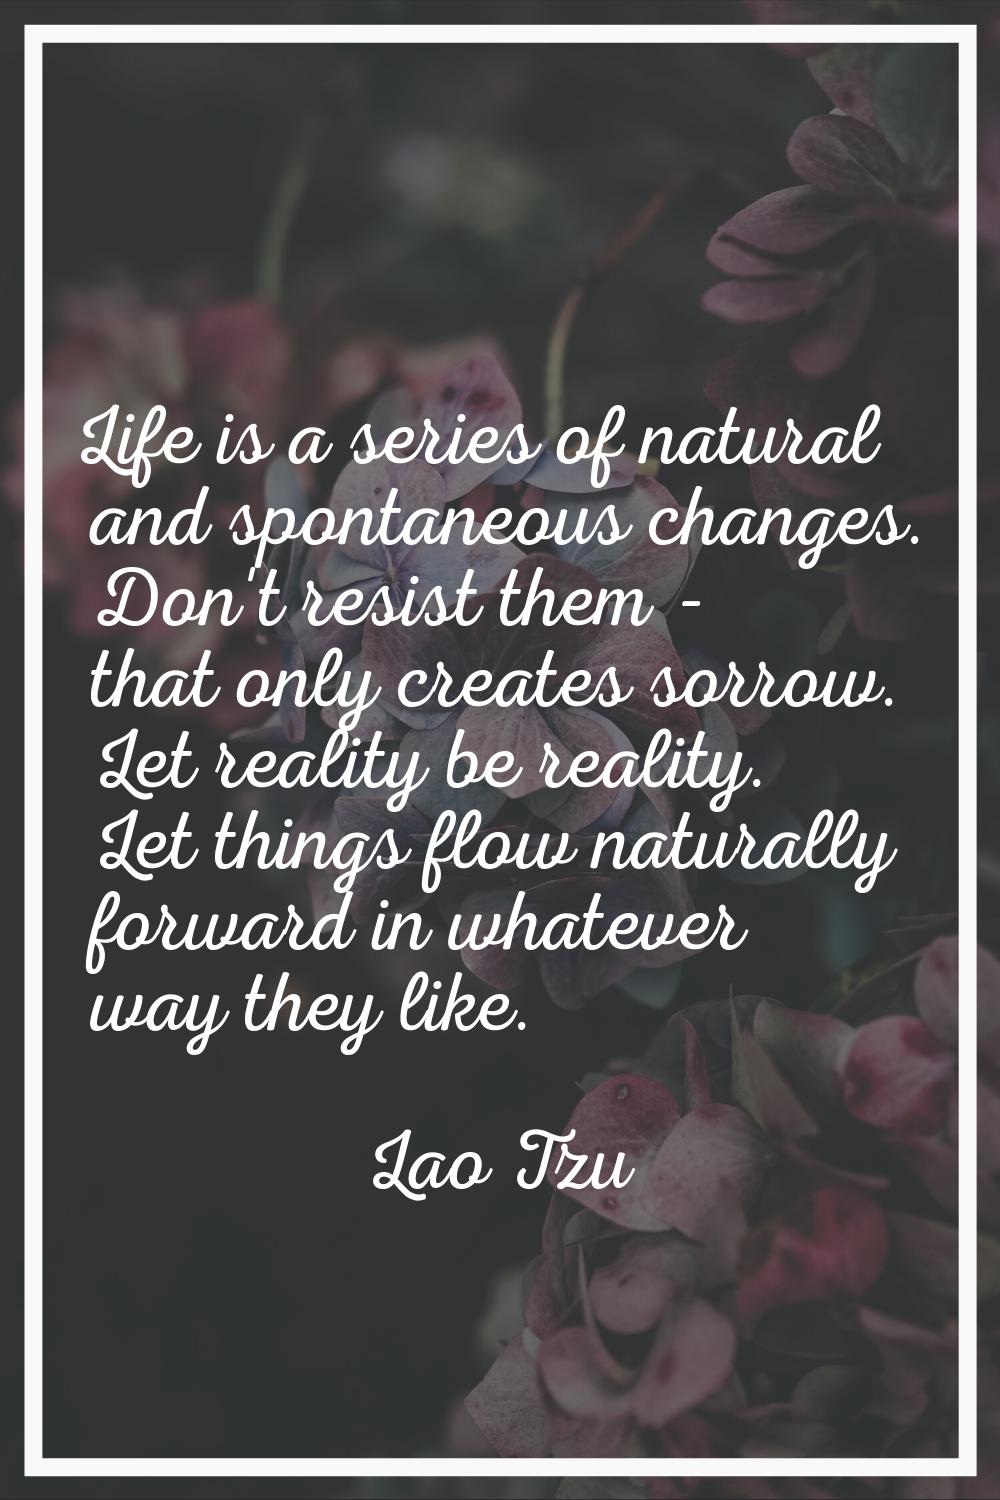 Life is a series of natural and spontaneous changes. Don't resist them - that only creates sorrow. 